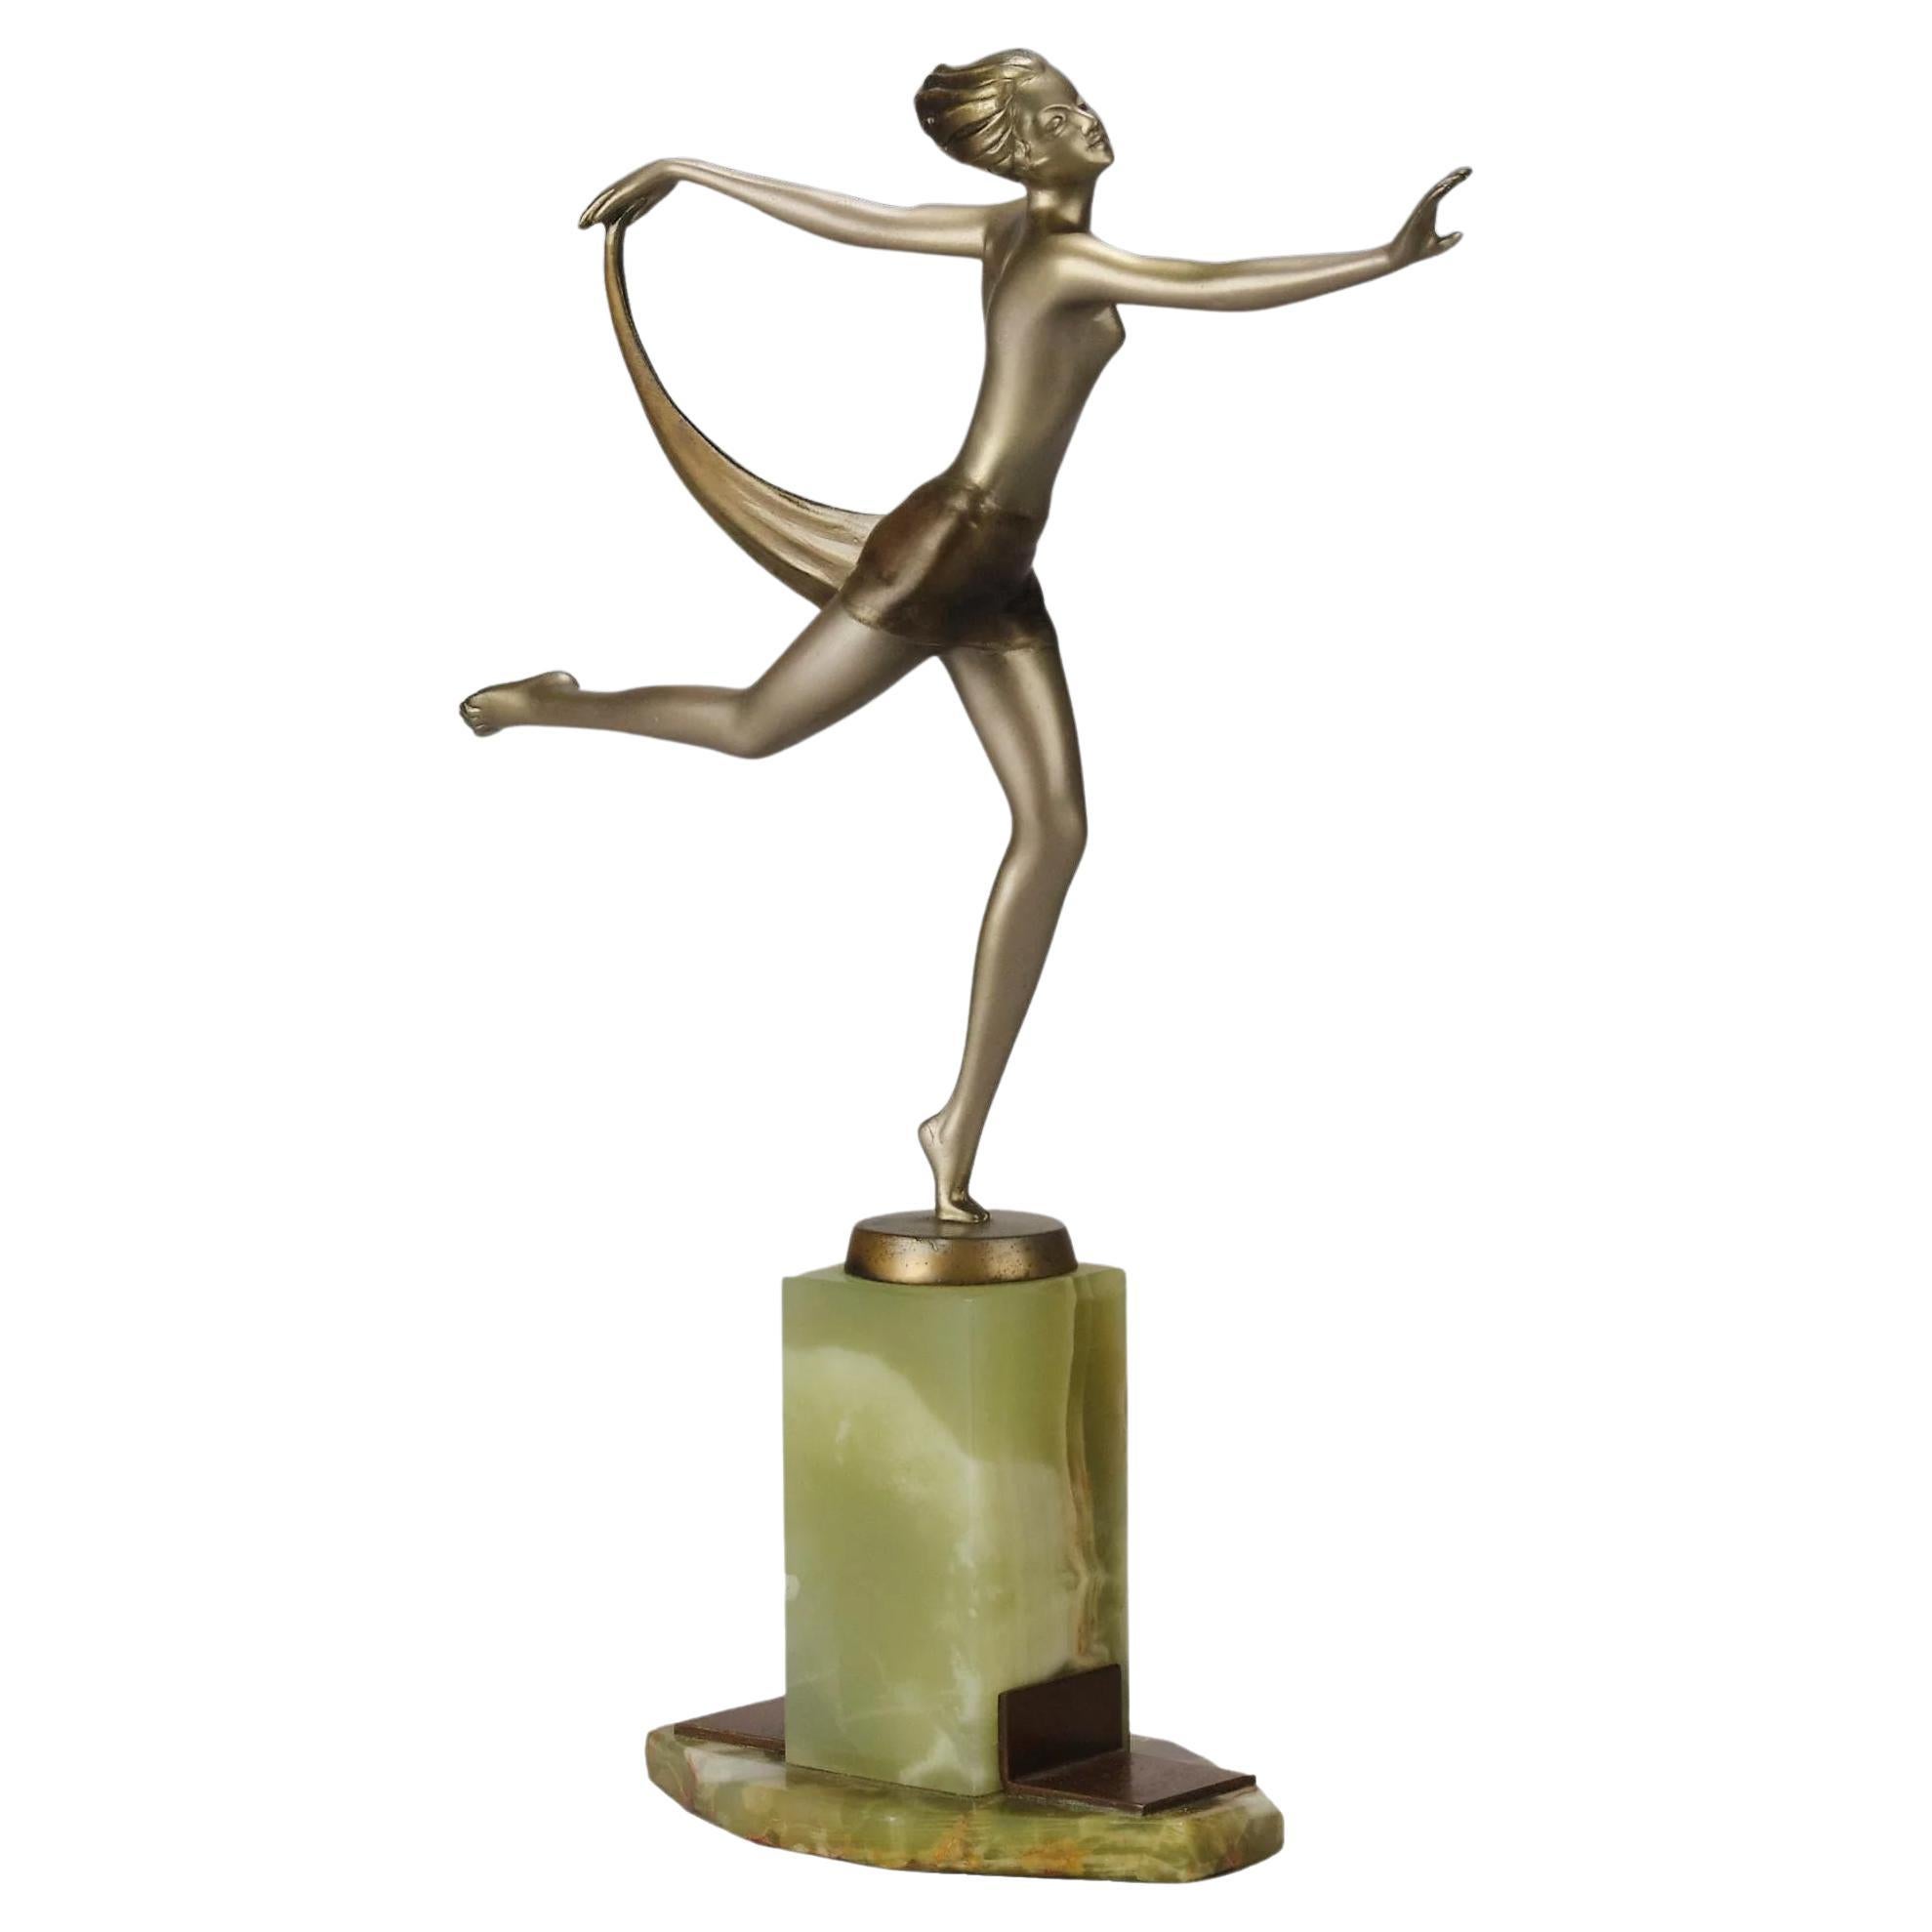 Cold-Painted Austrian Bronze Study Entitled "Dancer with Shawl" by Josef Lorenzl